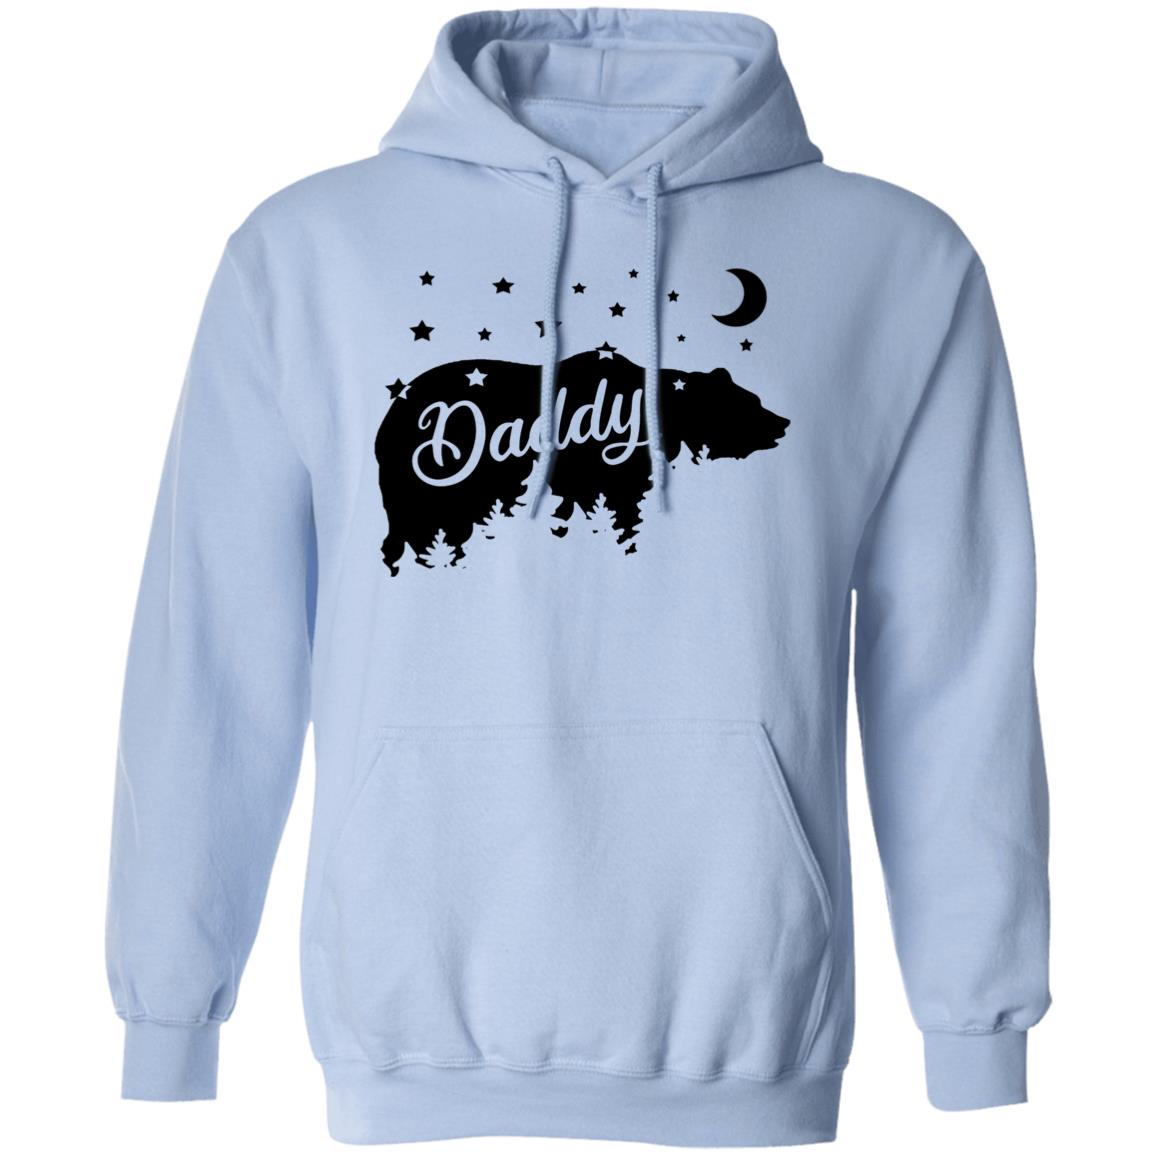 Daddy Pullover Hoodie